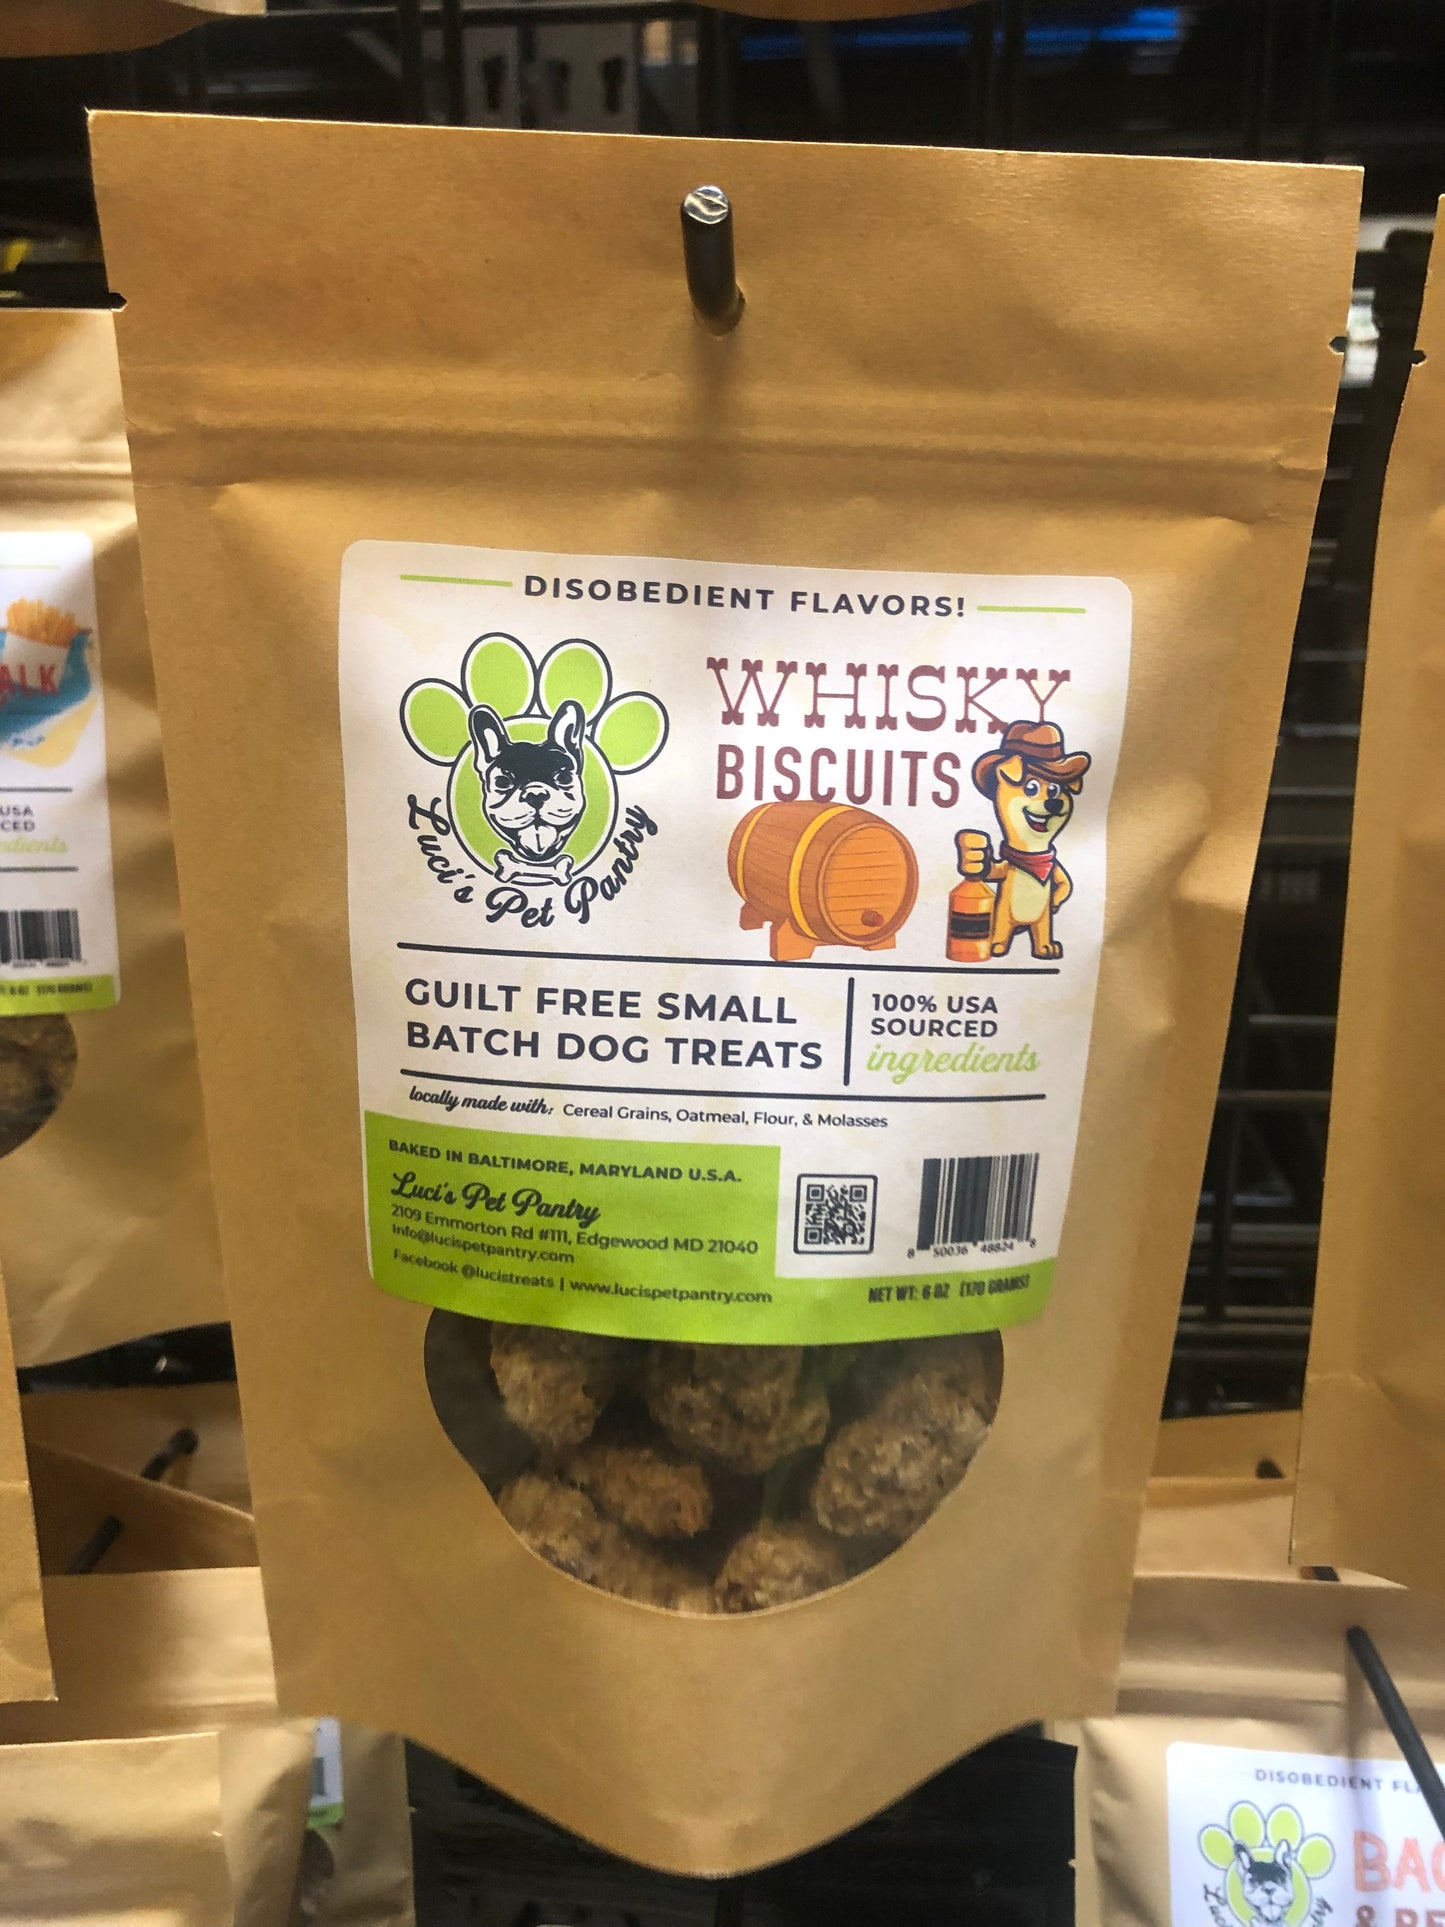 Bourbon Biscuits - All Natural "Cereal Grains" Dog & Puppy Treats - Disobedient Biscuits 6 oz. Pouch